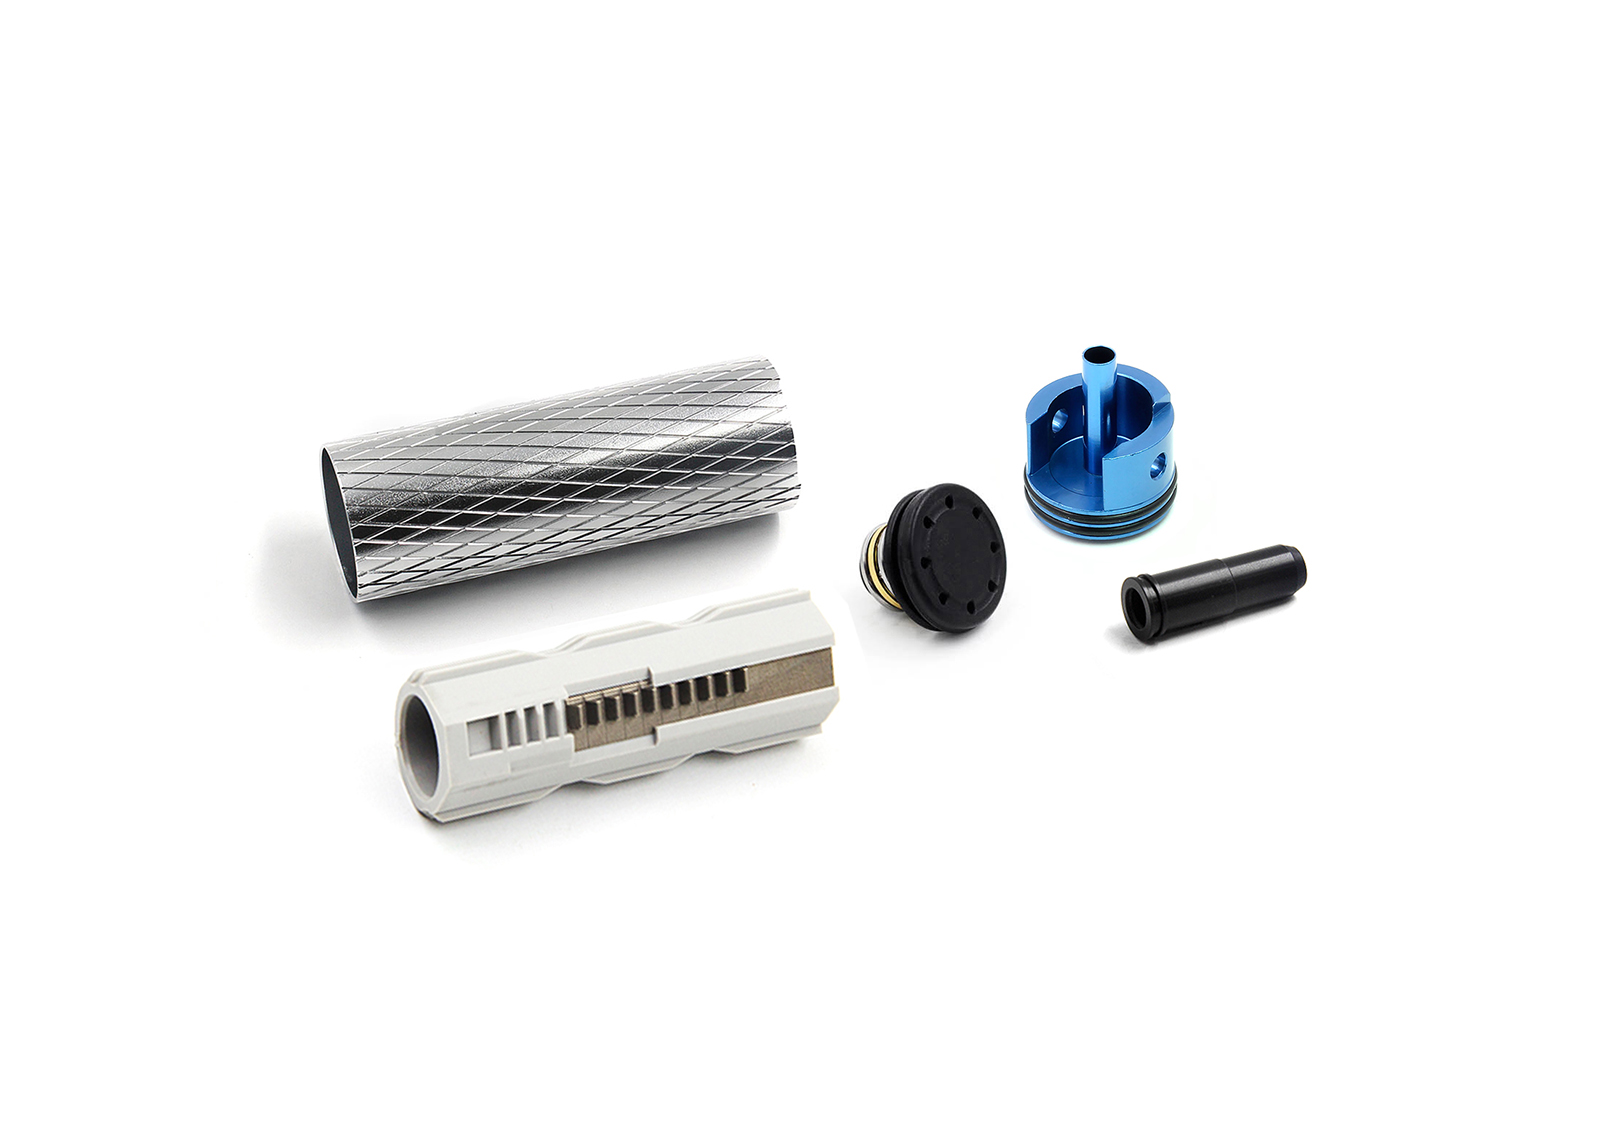 Cylinder Set for AUG (AOE Piston) - Modify Airsoft parts